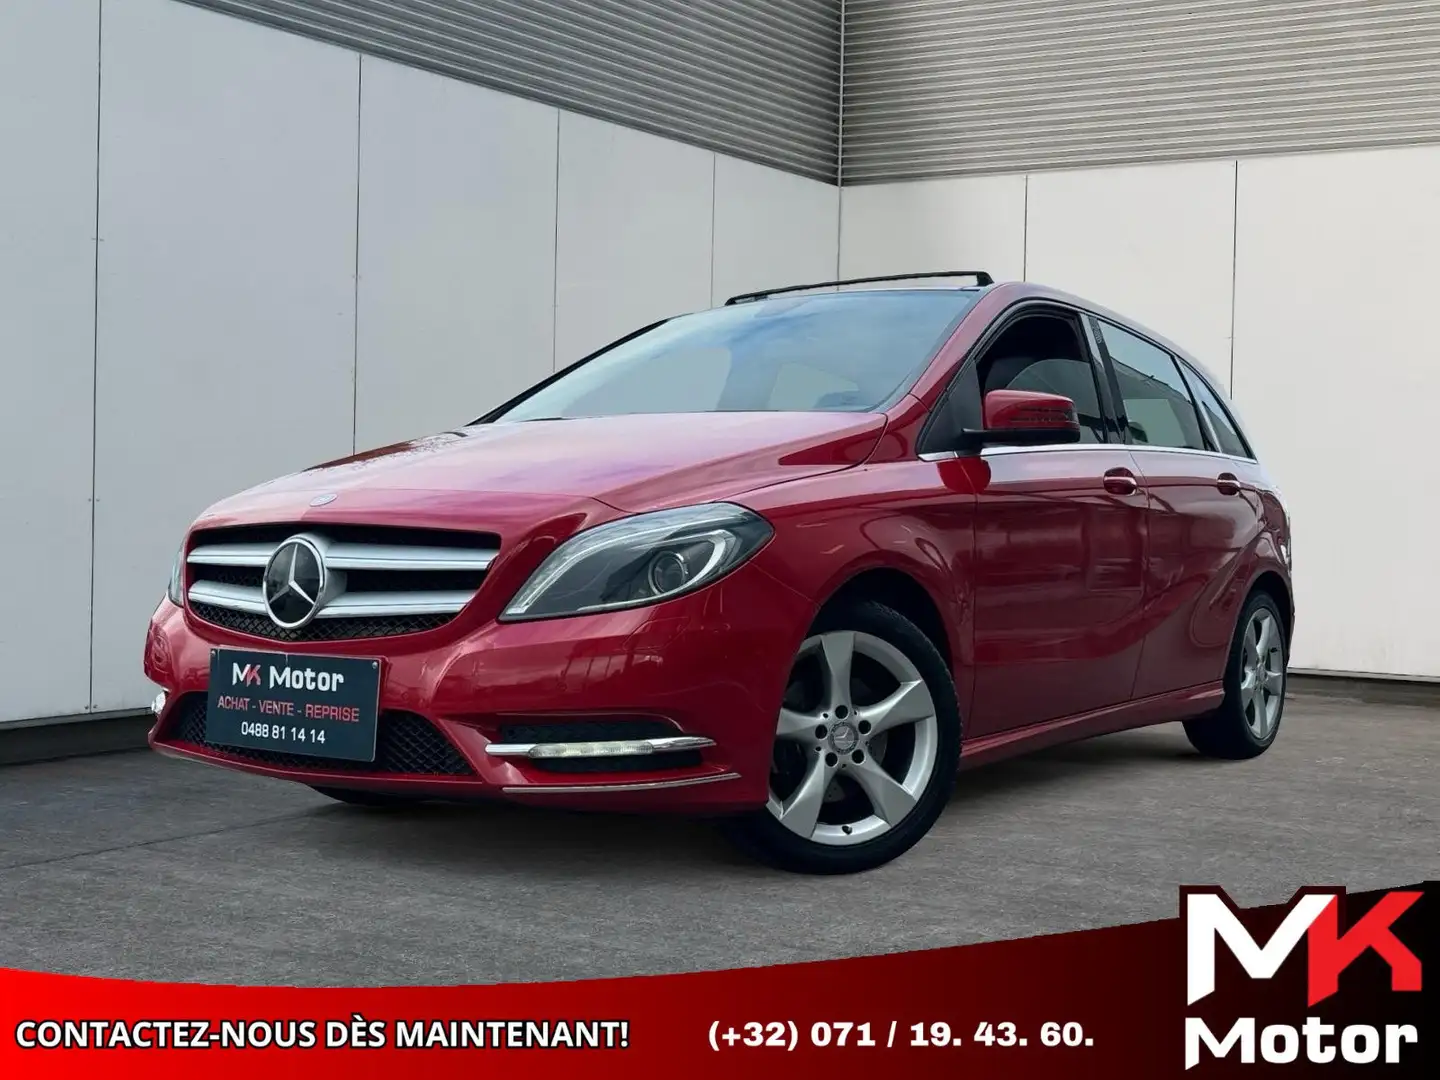 Mercedes-Benz B 180 CDI 109CV TOIT OUVRANT - GPS - PACK SPORT Rosso - 1